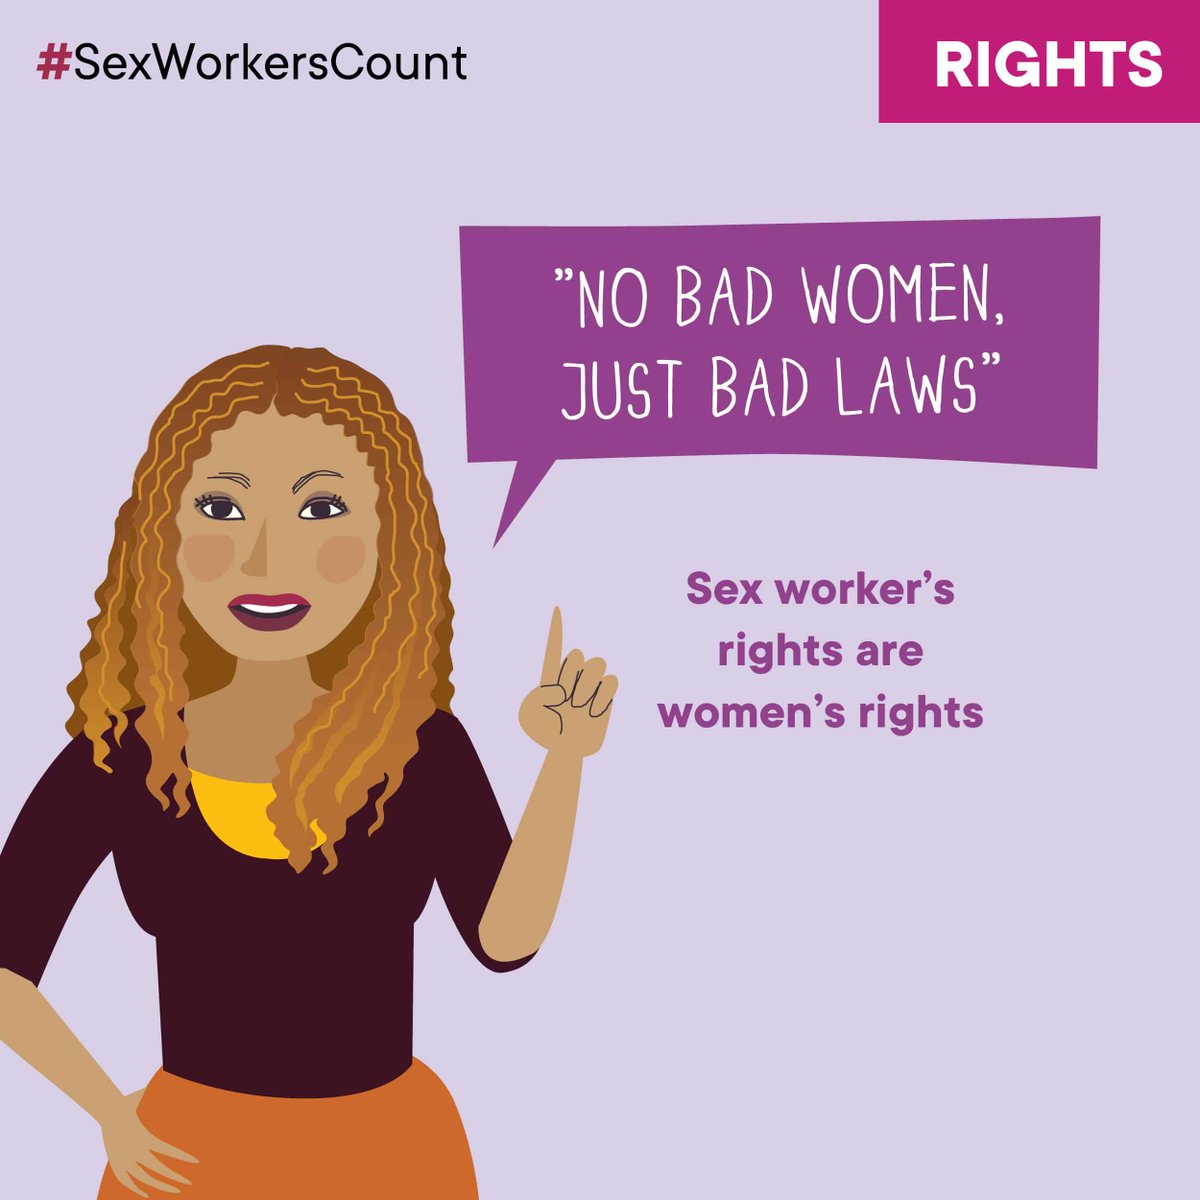 Sex workers' rights are central to the fight for women’s rights & achieving gender equality. Yet, there continues to be disagreement about how best to ensure women in the sex industry are free from violence & discrimination. #SexWorkersCount For more bit.ly/3JMWHtx